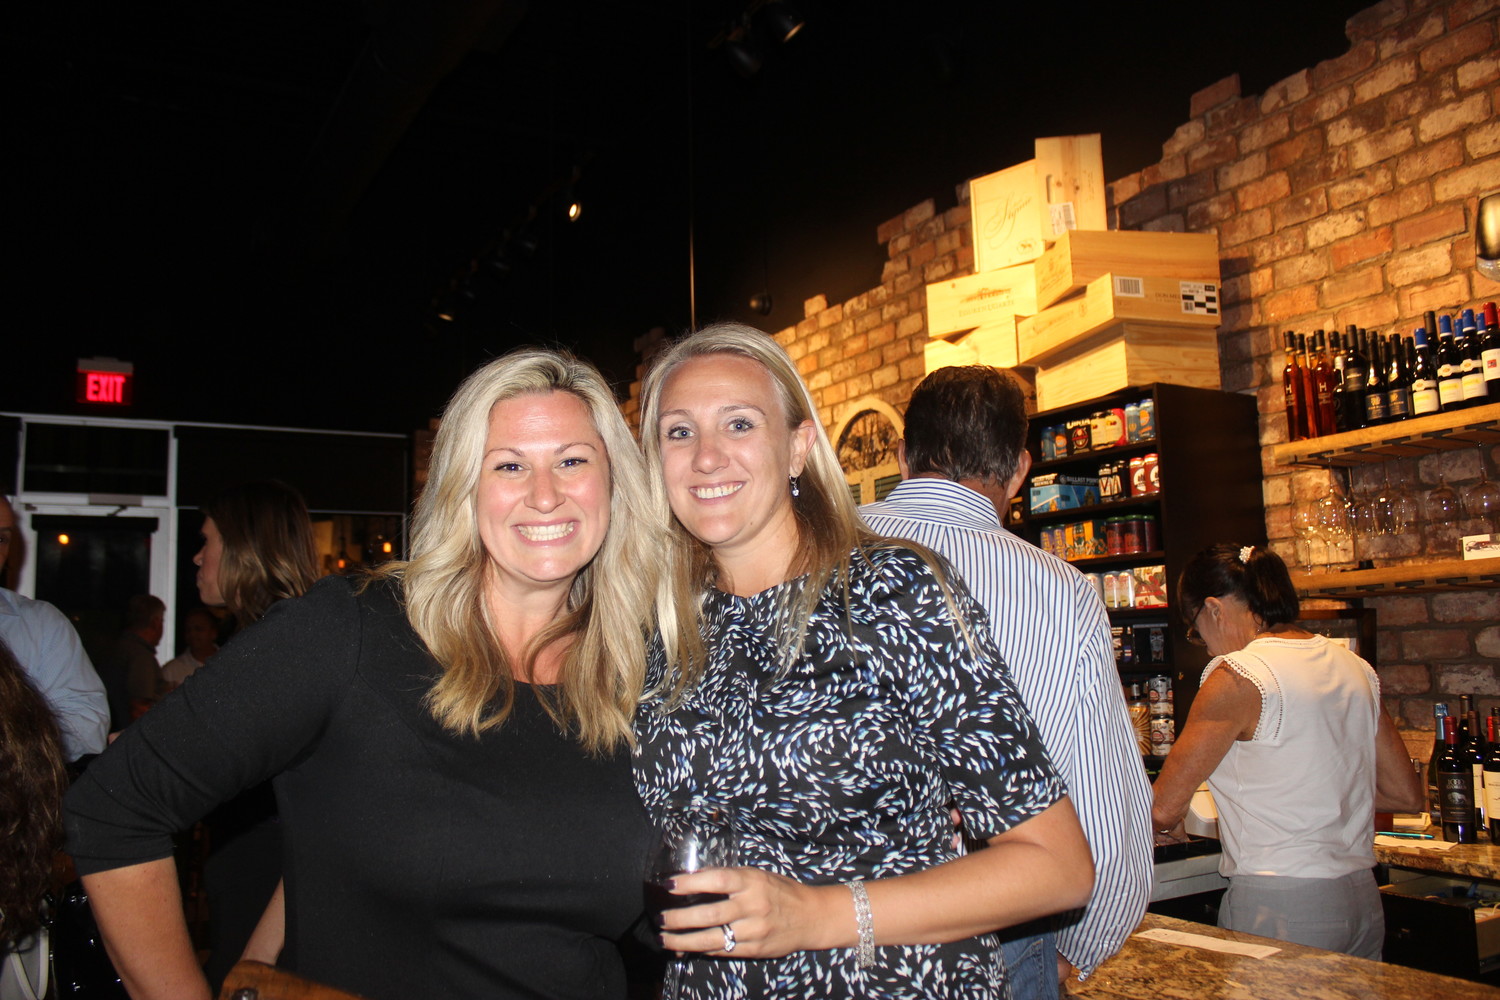 Sarah McKeown and Megan Kennedy gather at a fundraiser held at Coastal Wine Market in Nocatee on Oct. 1 supporting the Alzheimer's Association’s 2018 Walk to End Alzheimer’s in Jacksonville.